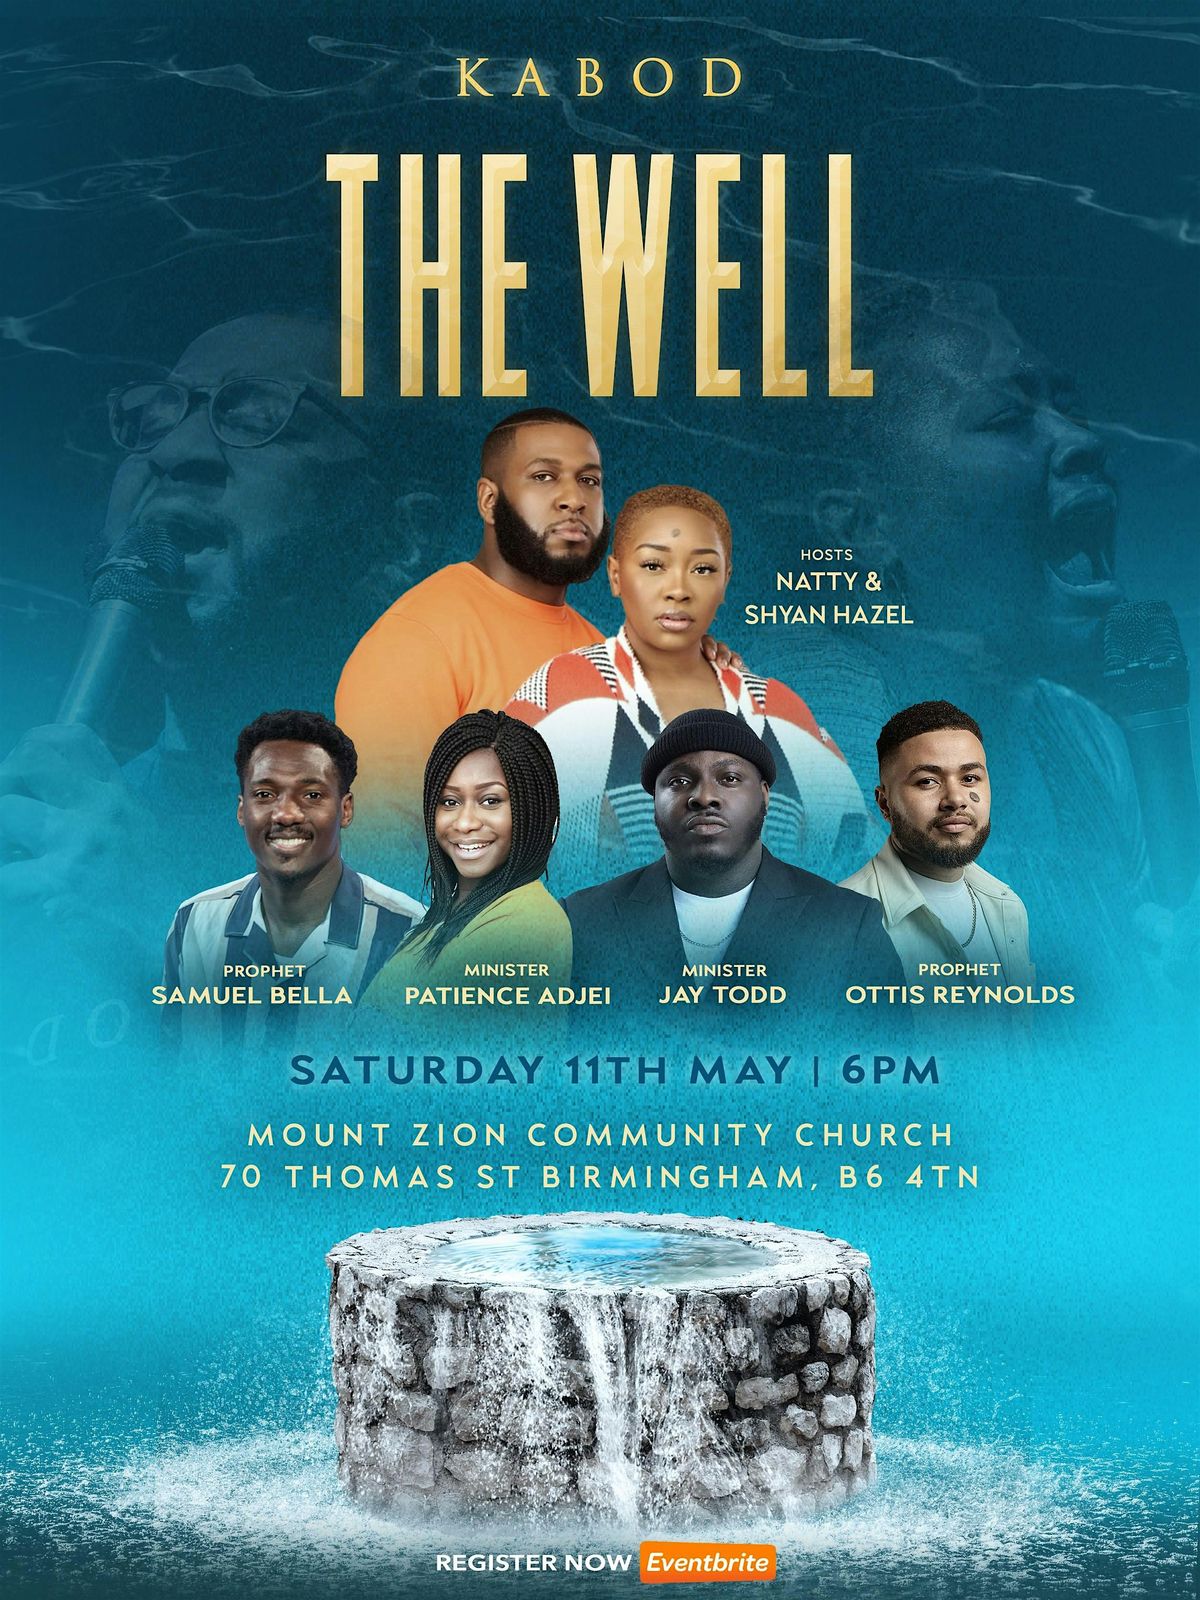 KABOD: The Well